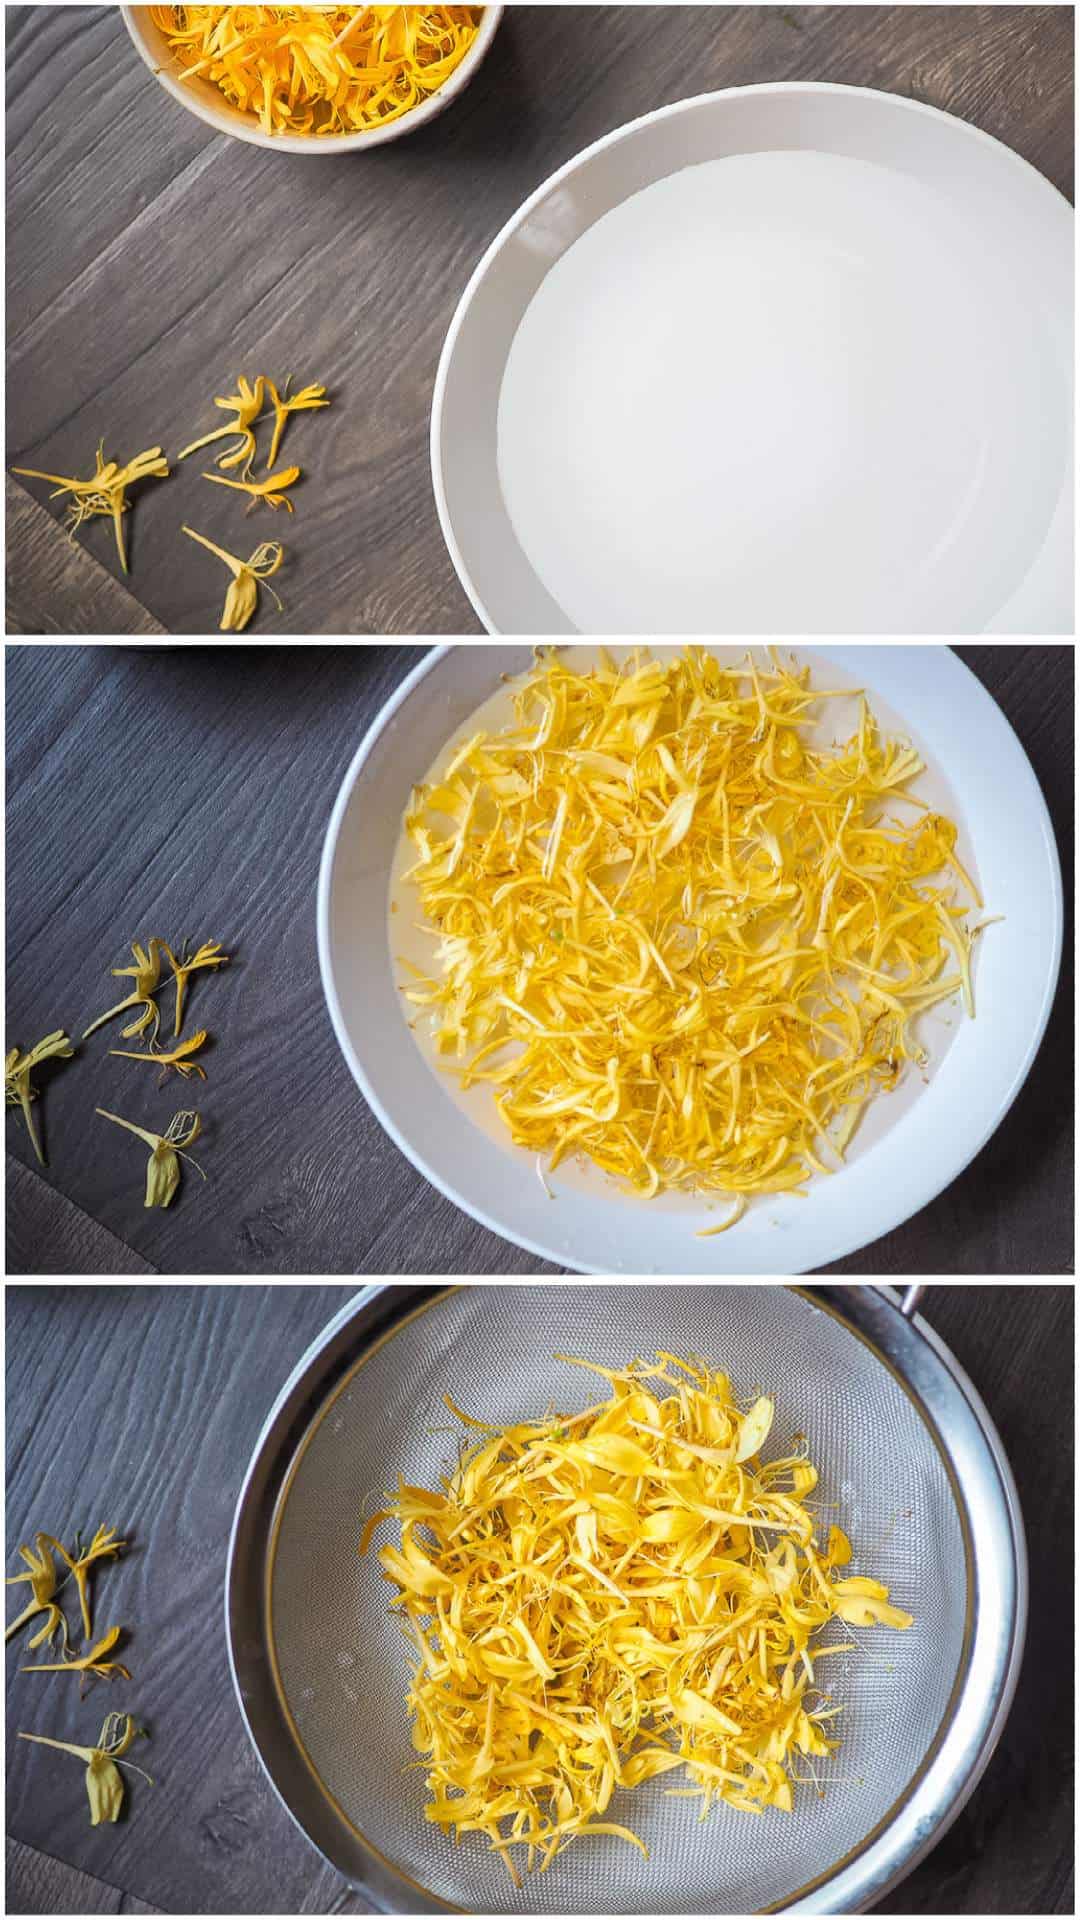 A collage of images showing how to clean honeysuckle flowers.